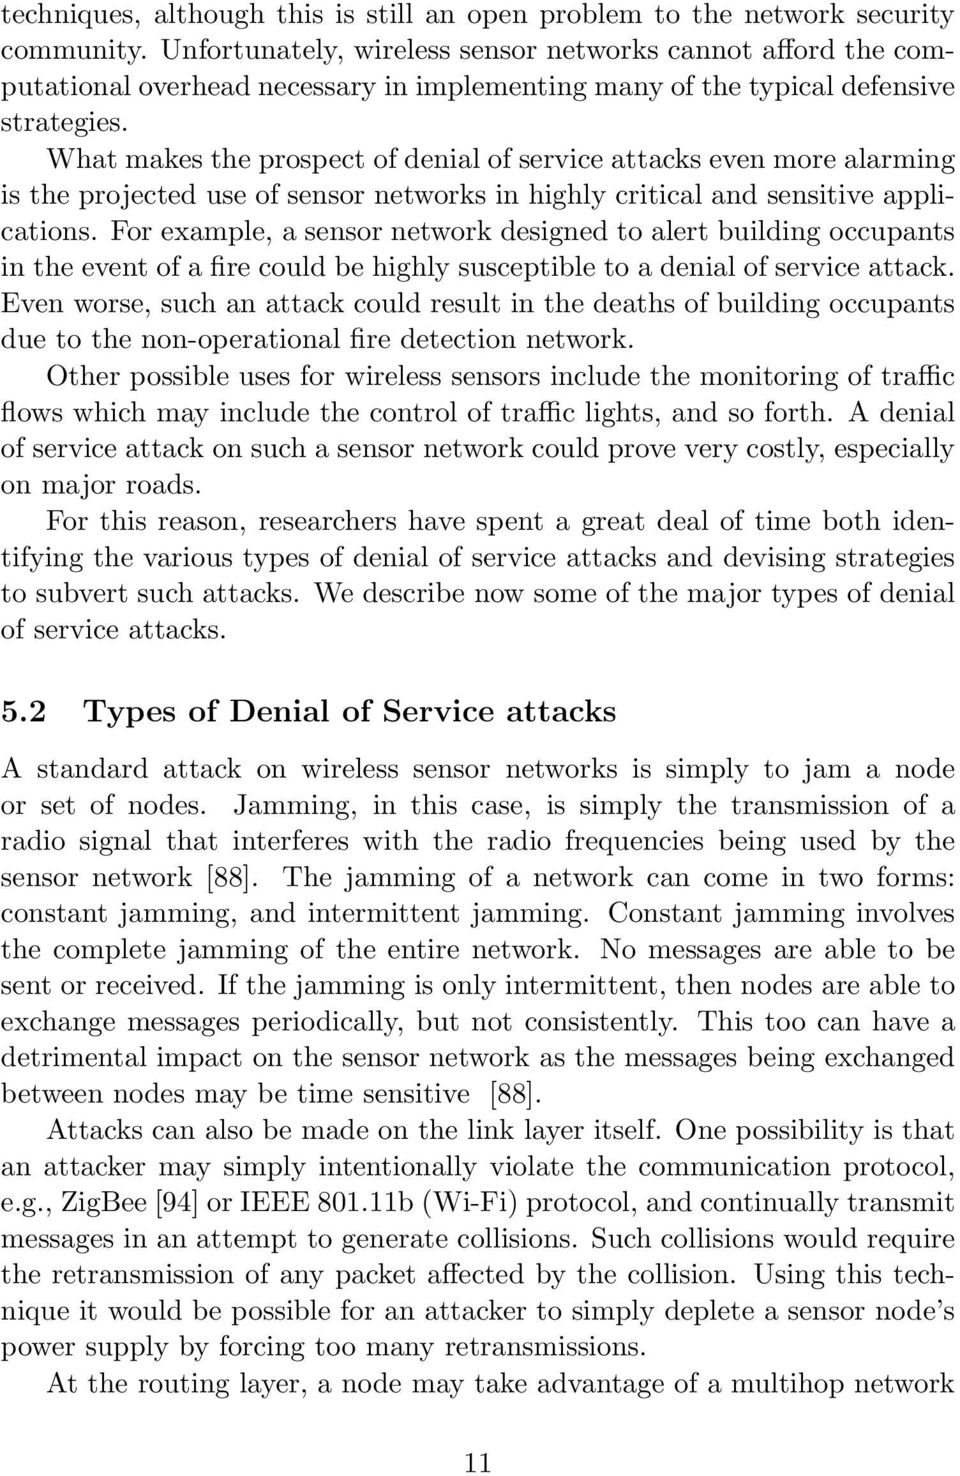 What makes the prospect of denial of service attacks even more alarming is the projected use of sensor networks in highly critical and sensitive applications.